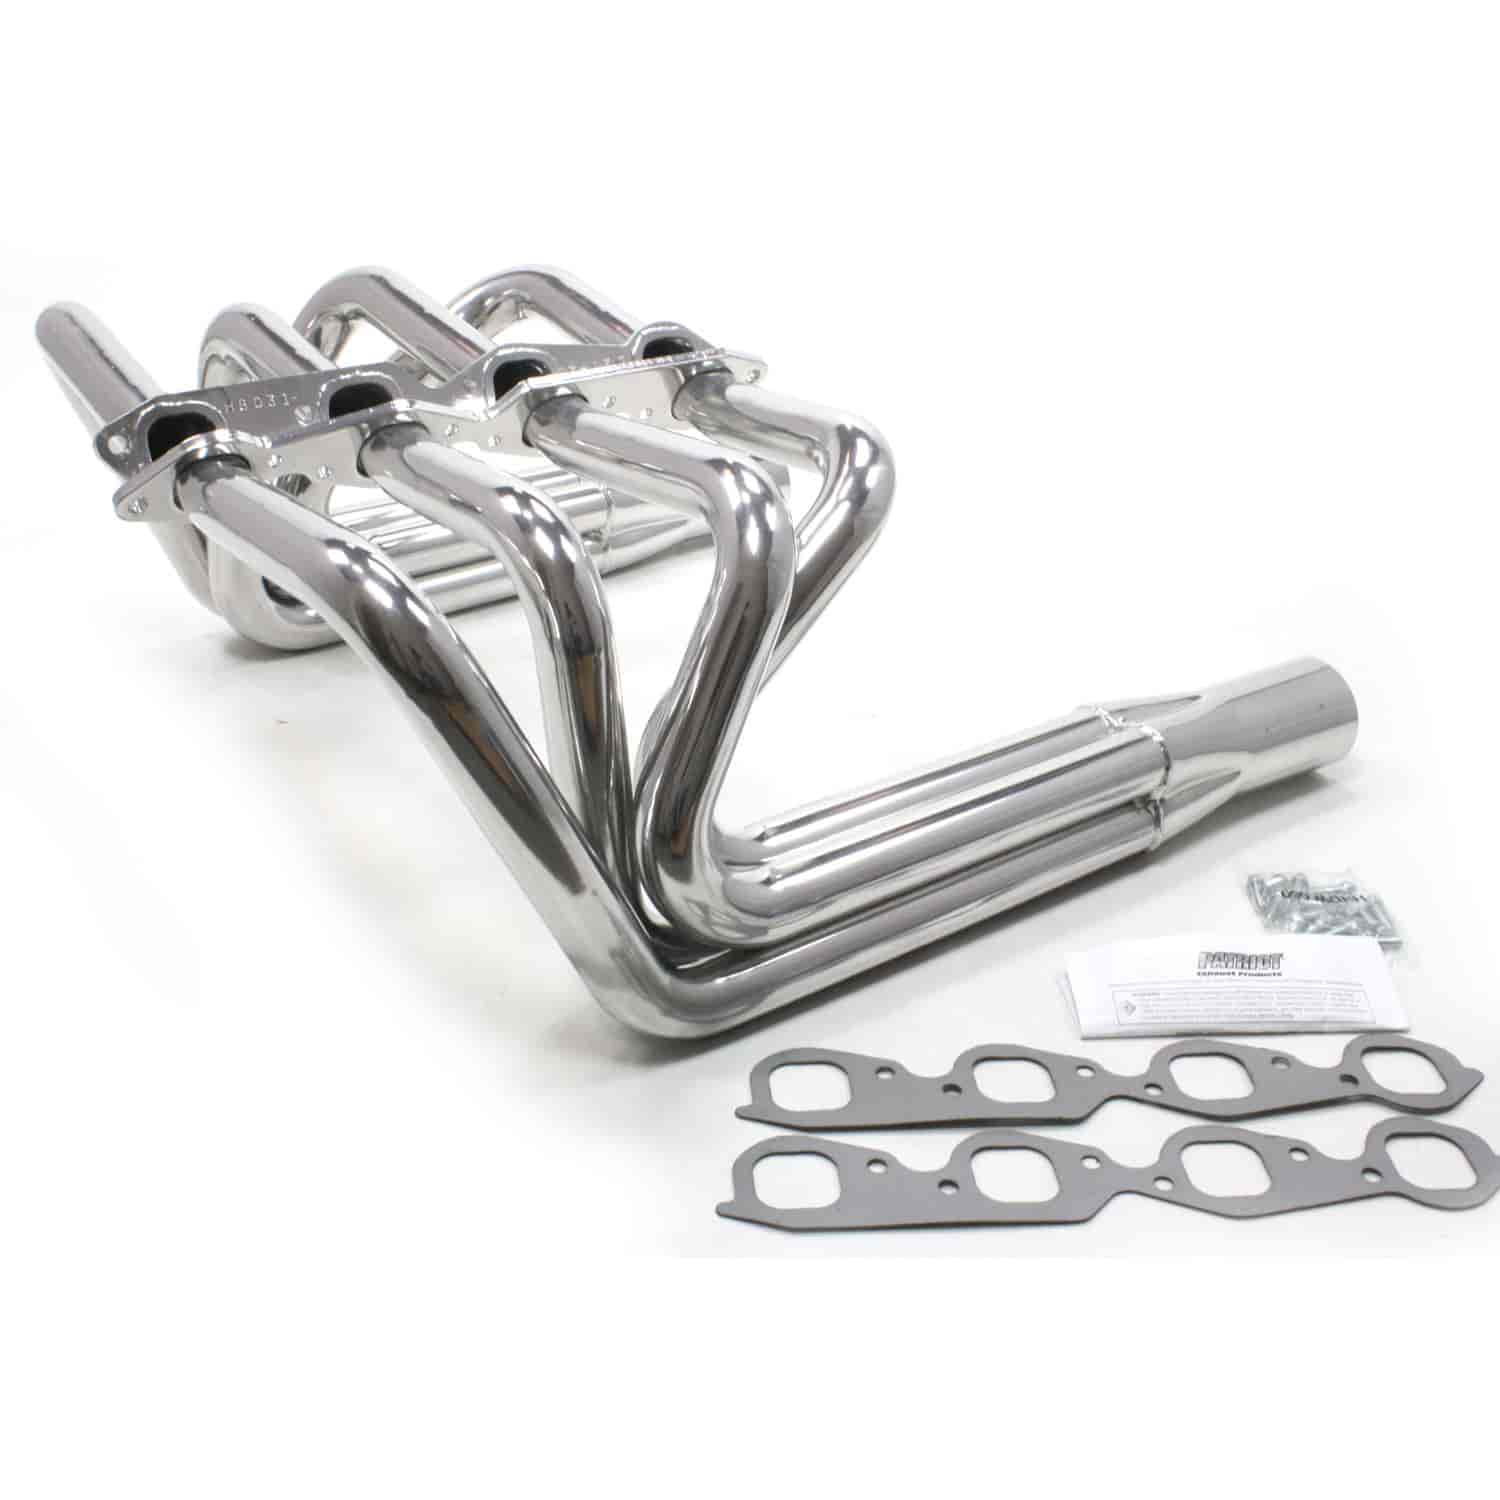 Sprint Car Style Headers for T-Bucket Chevy Big Block 396-502